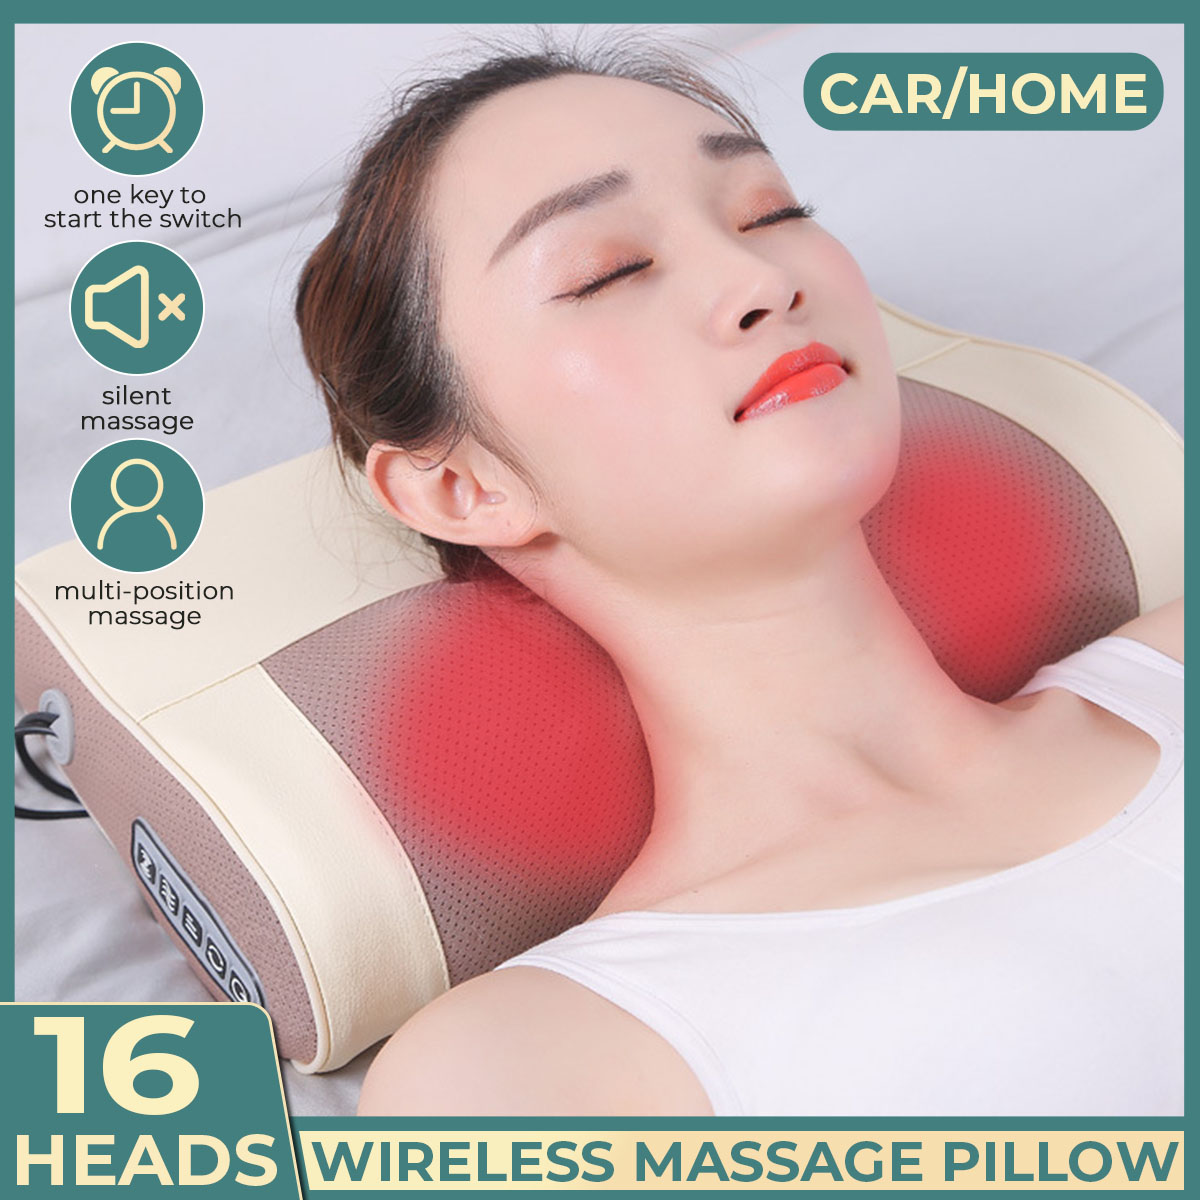 16-Heads-Neck-Massage-Pillow-3-Gears-Heating-Magnetic-Therapy-Massage-Device-for-Neck-Waist-Abdomina-1804675-1